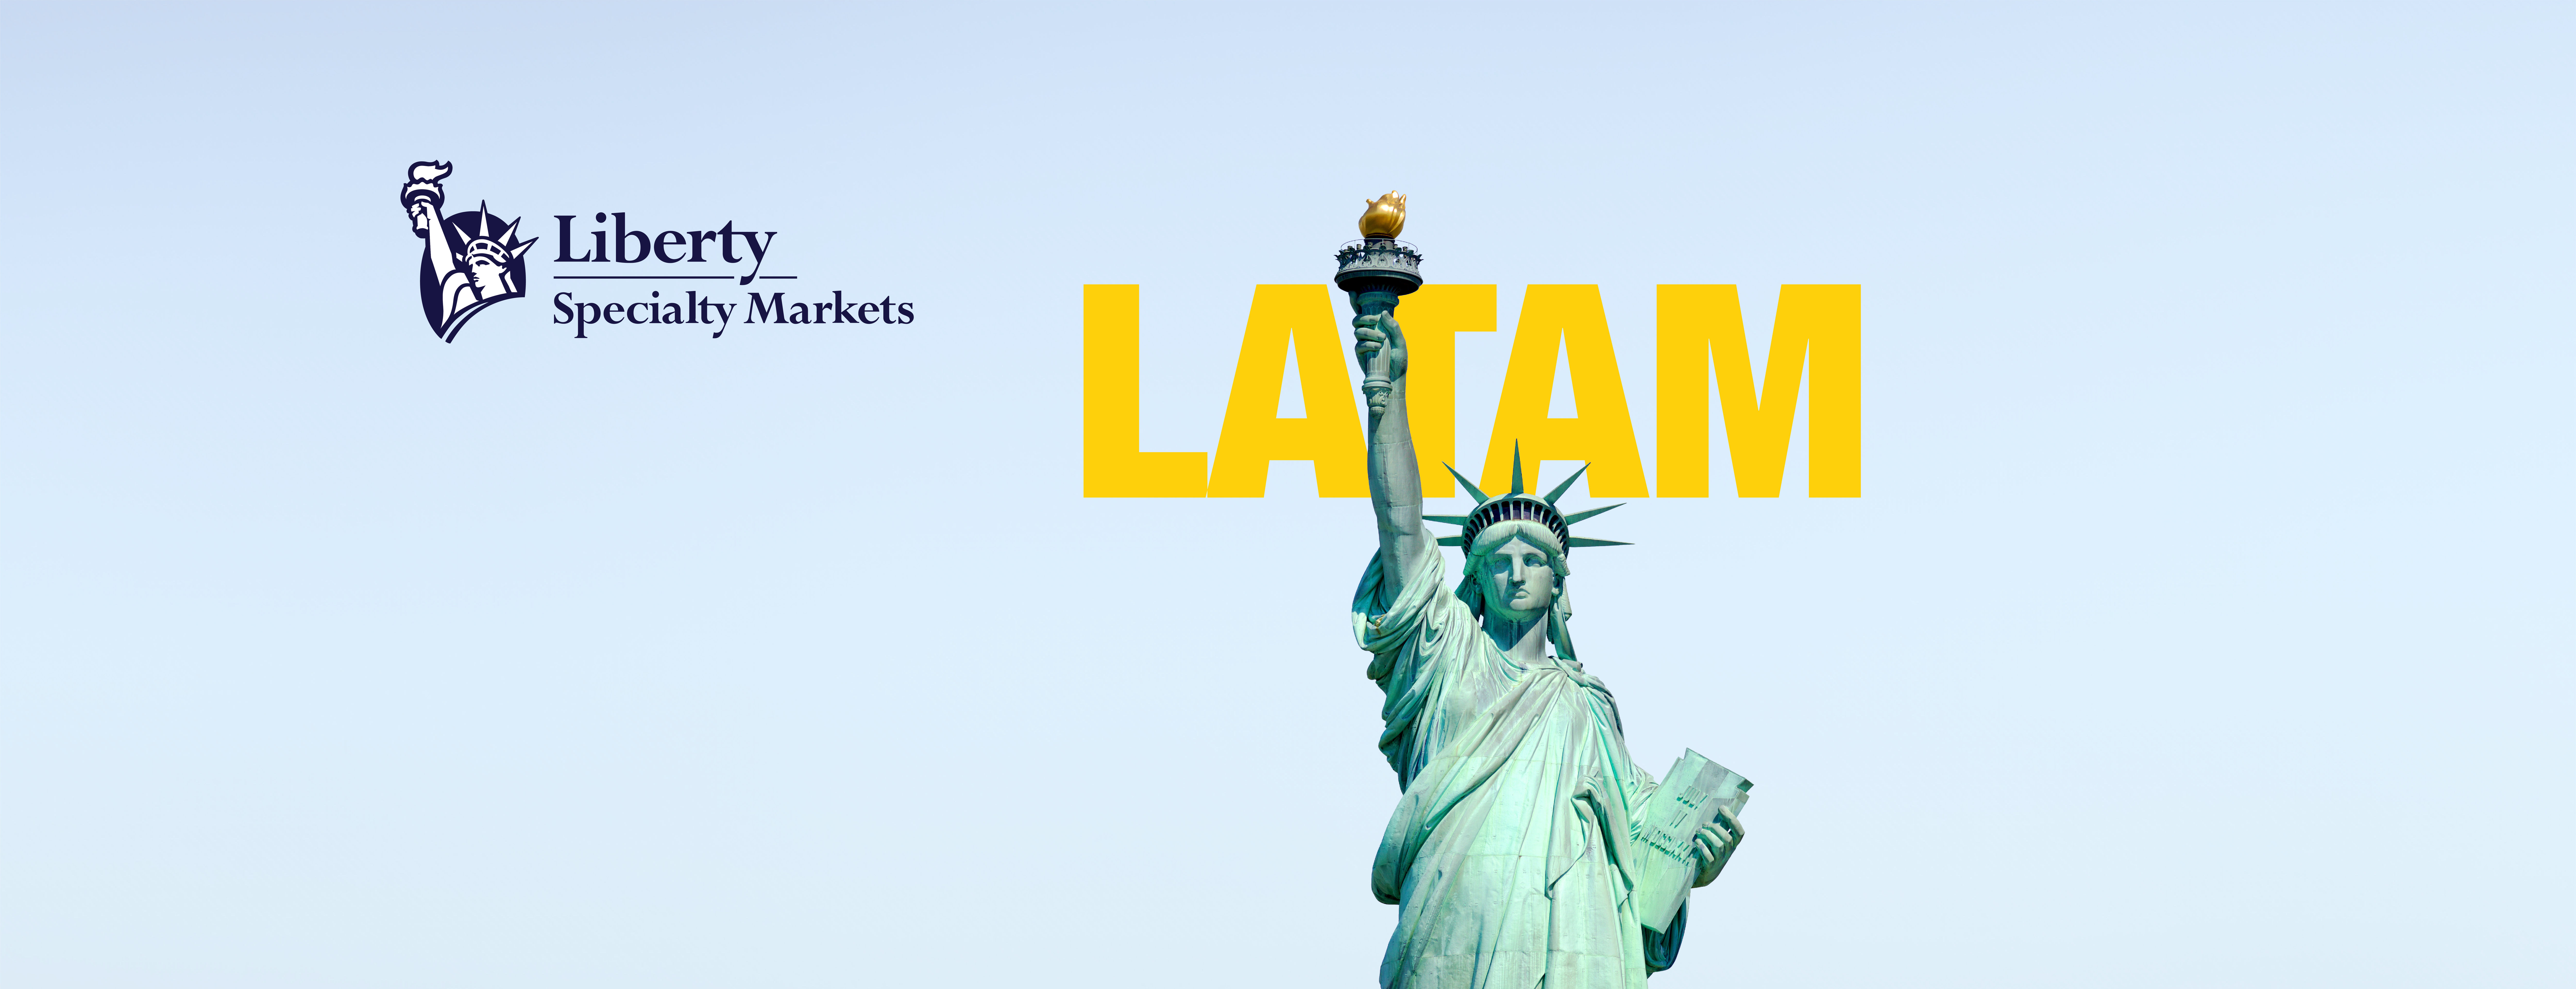 Homepage Liberty Specialty Markets Latam